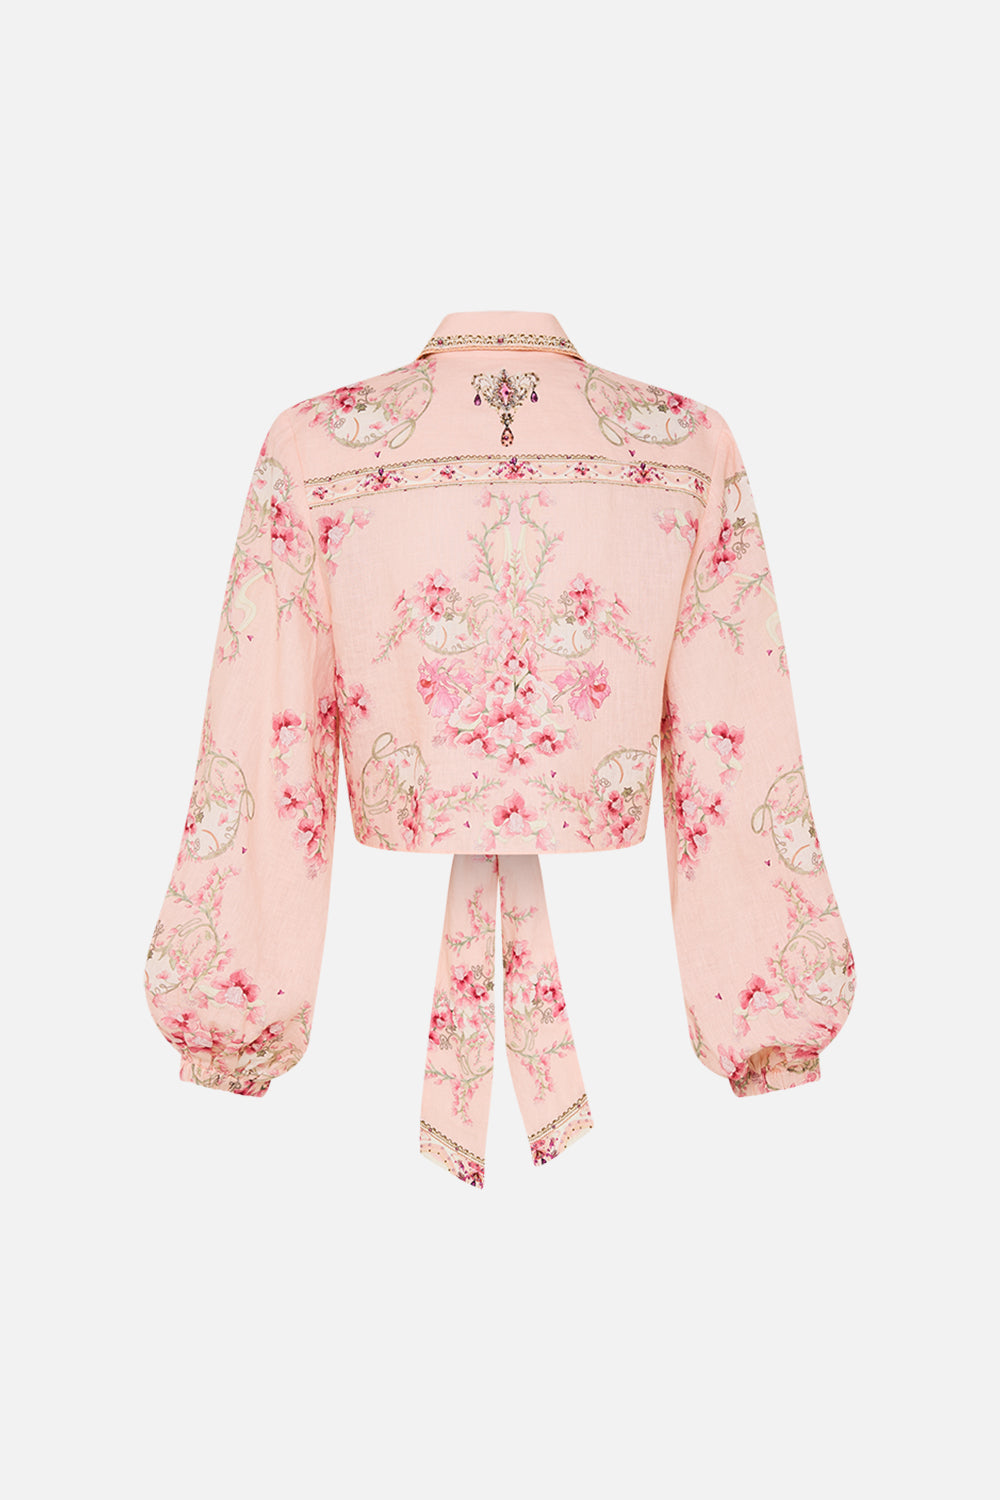 CROPPED WRAP SHIRT BLOSSOMS AND BRUSHSTROKES